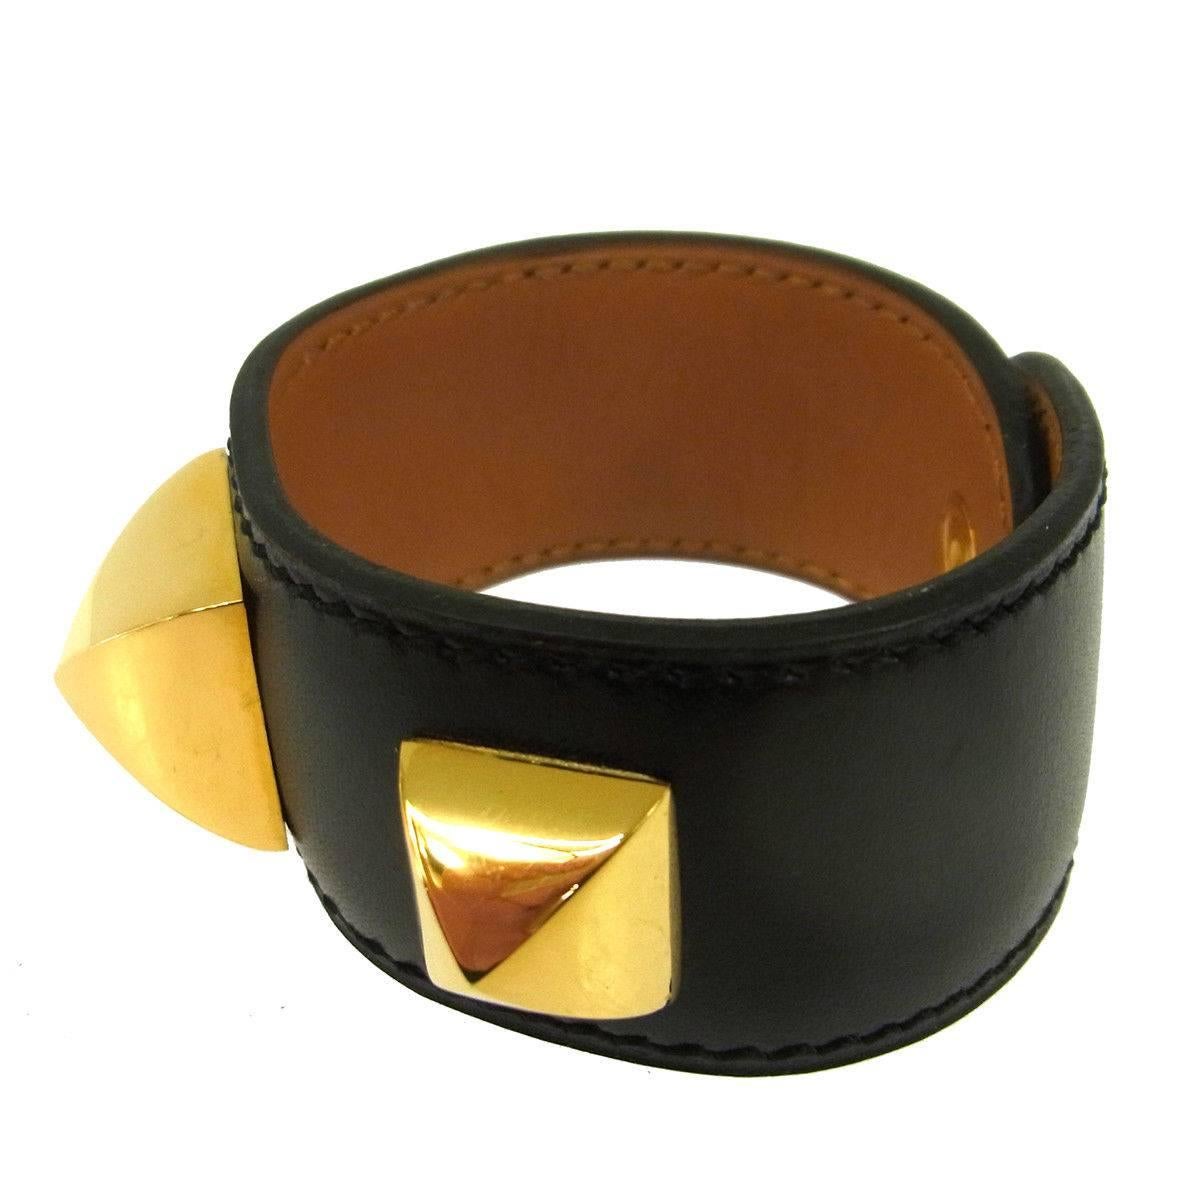 CURATOR'S NOTES

Hermes Black Leather Gold Stud Evening Men's Women's Cuff Bracelet in Box

Leather
Metal
Gold tone hardware
Made in France
Width 1"
Inner circumference ~6"
Includes original Hermes box